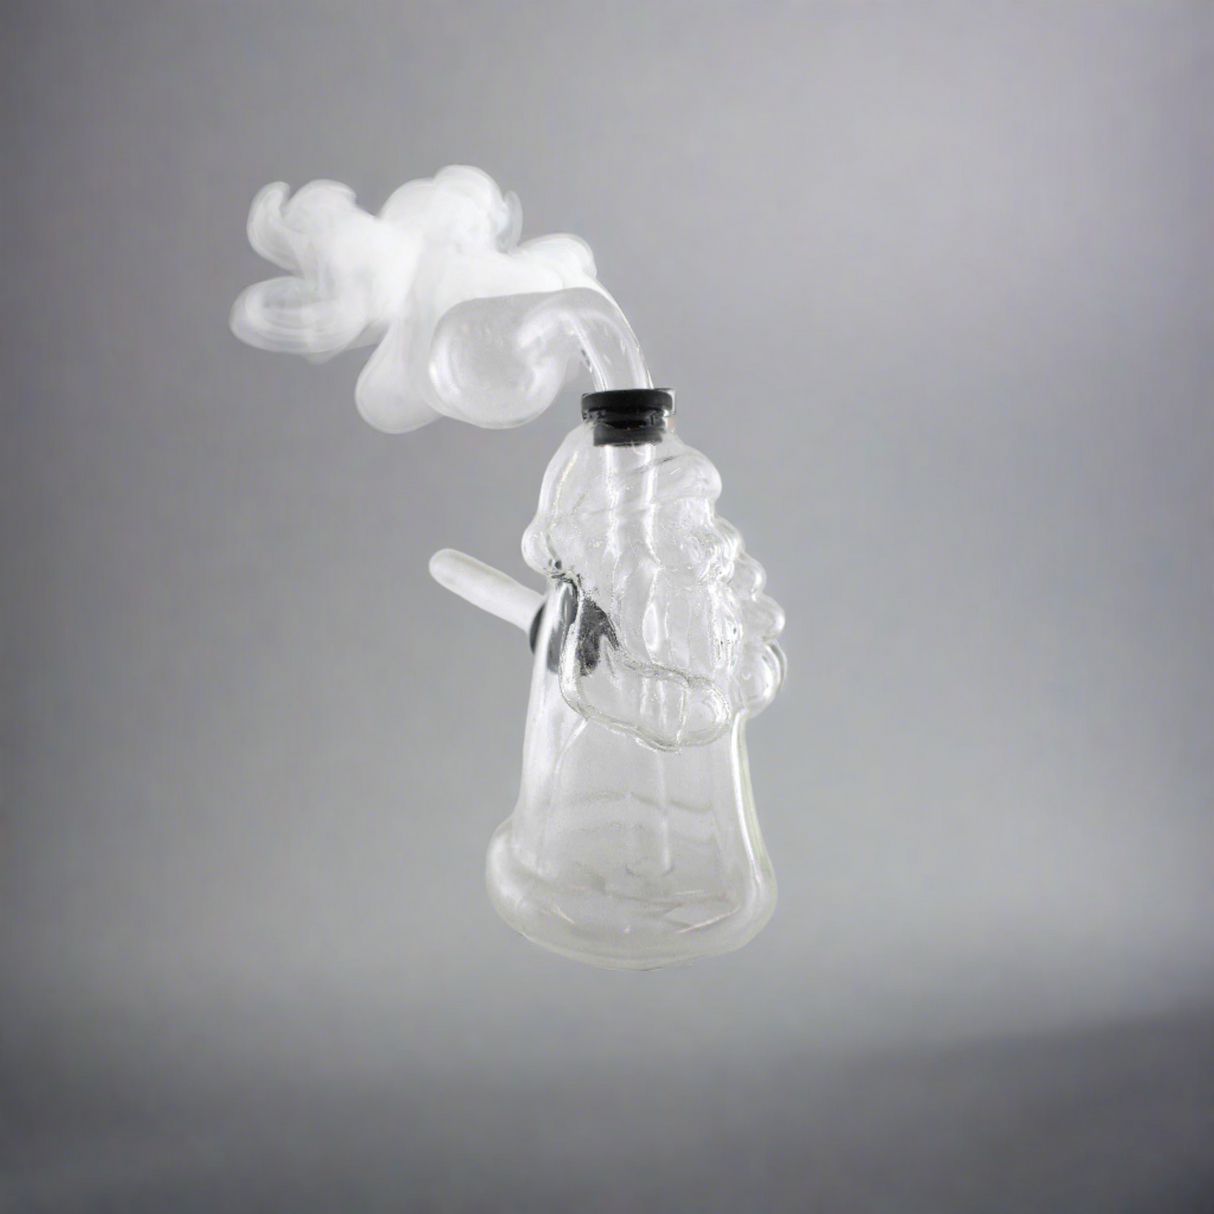 CLEAR GLASS DOUBLE SIDED SKULL OIL RIG